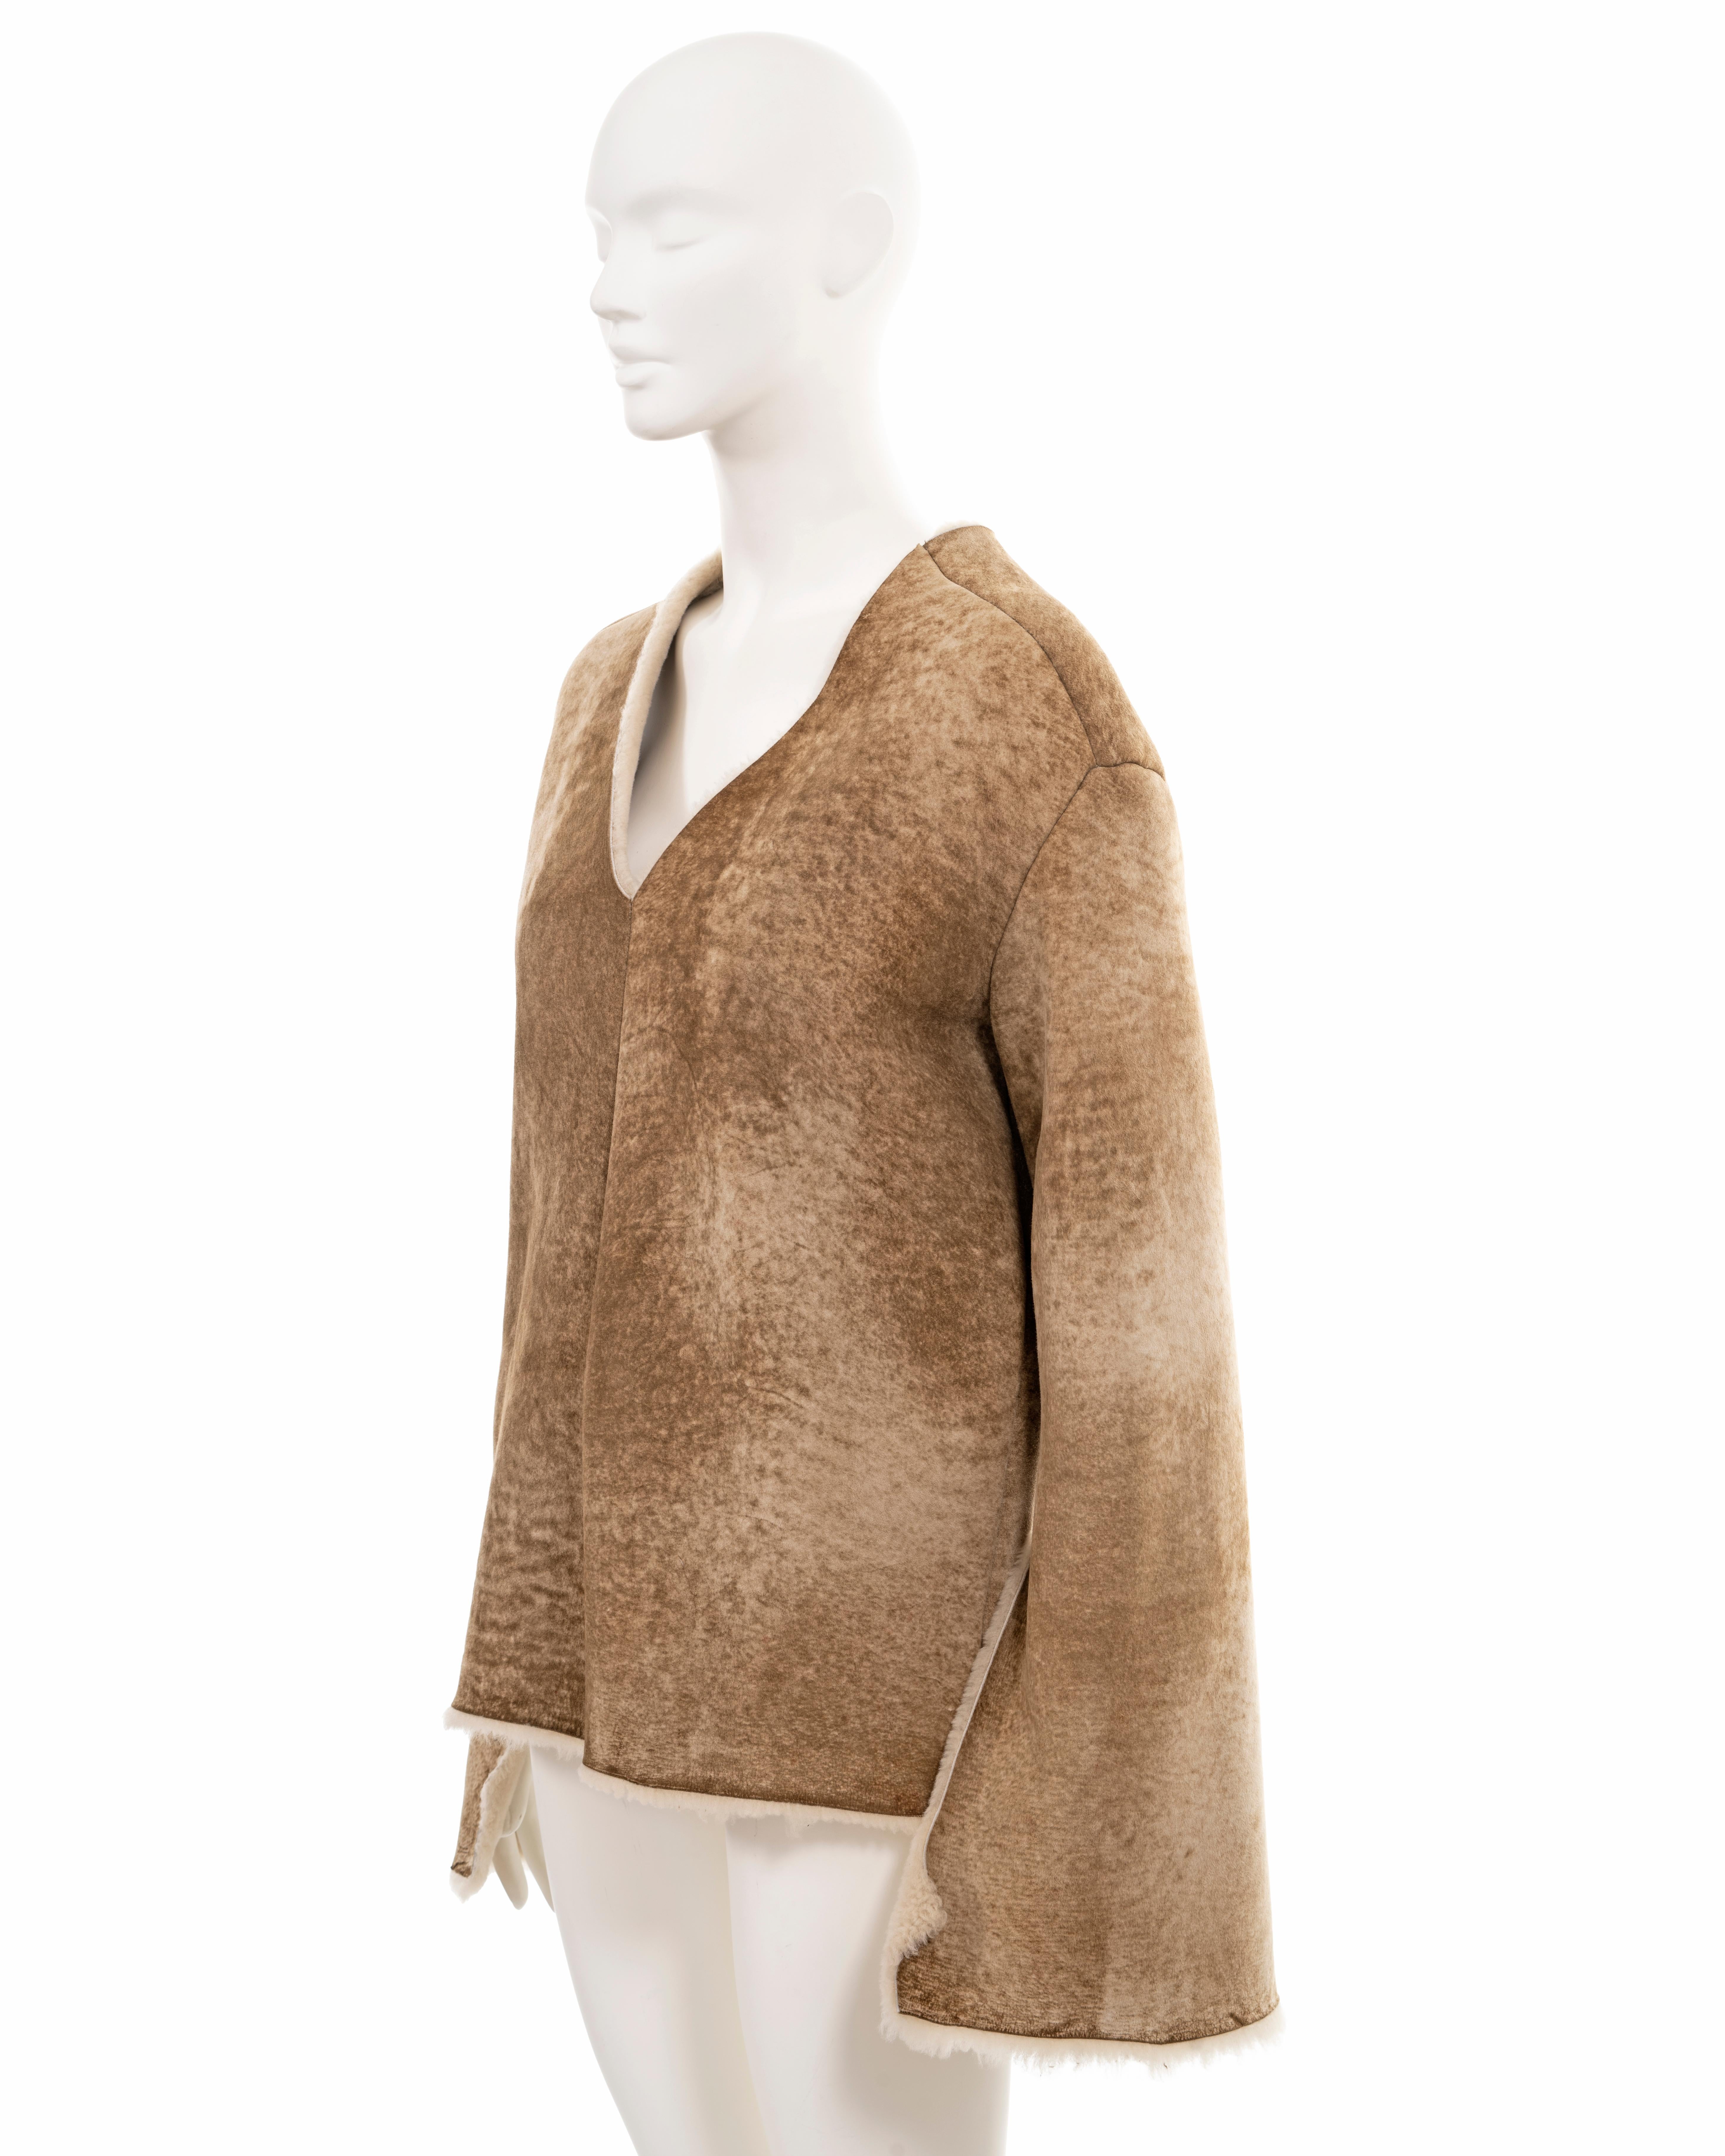 Ruffo Research by A.F. Vandevorst shearling pullover sweater, fw 2000 For Sale 1